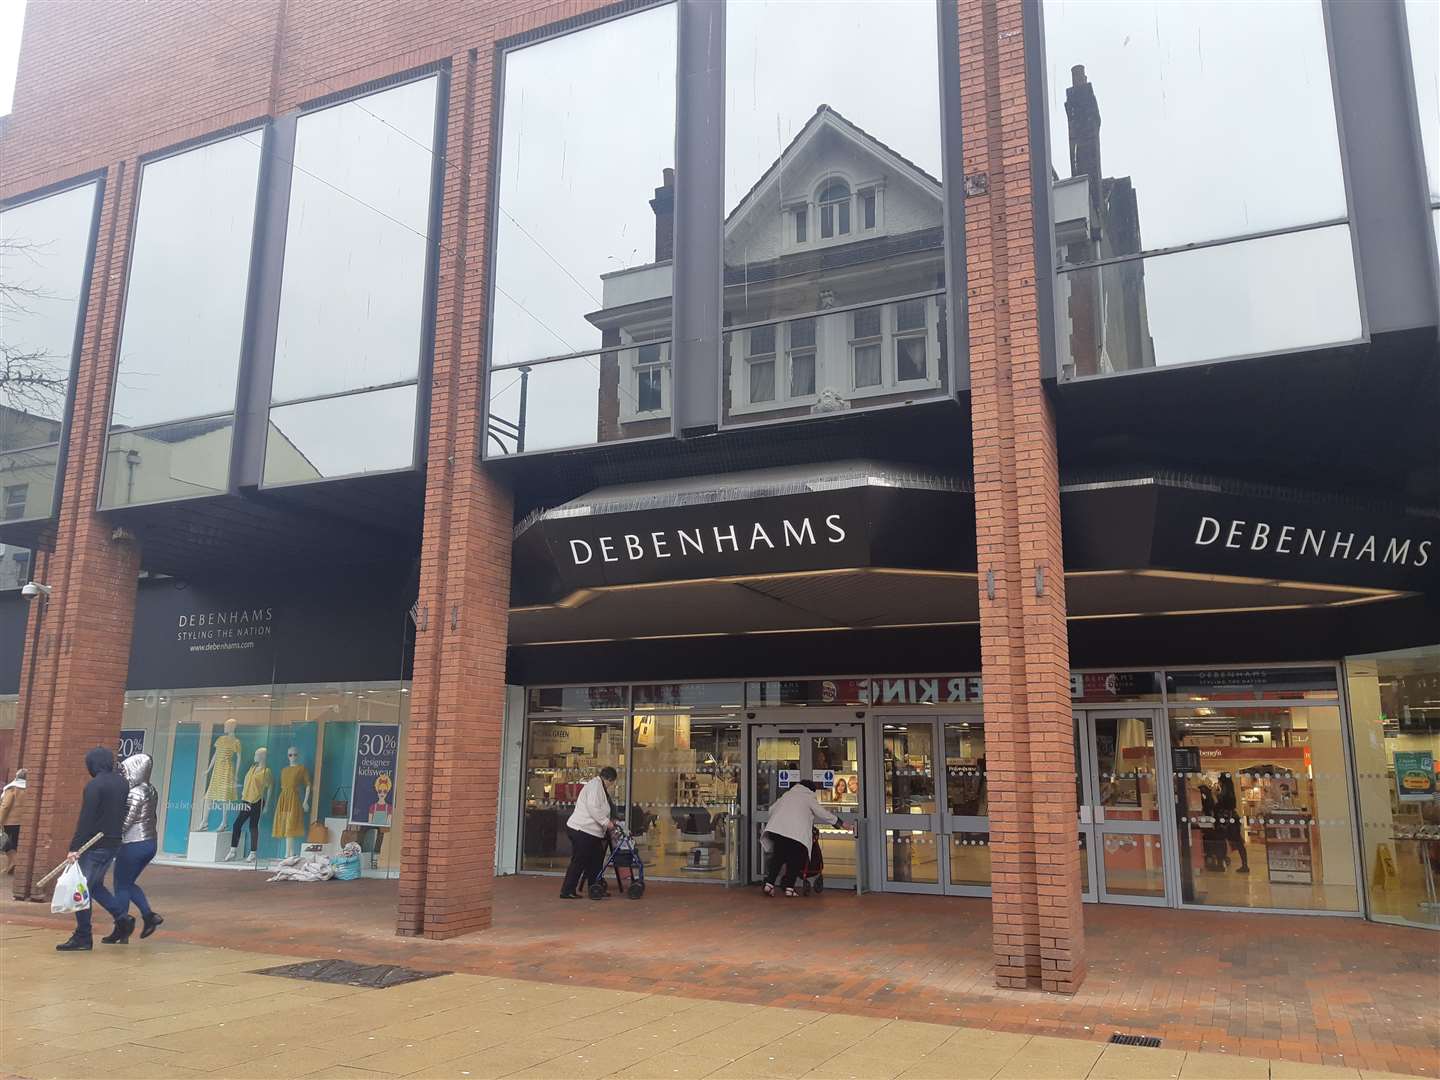 Debenhams in High Street, Chatham could face closure as the company goes into administration (8451286)